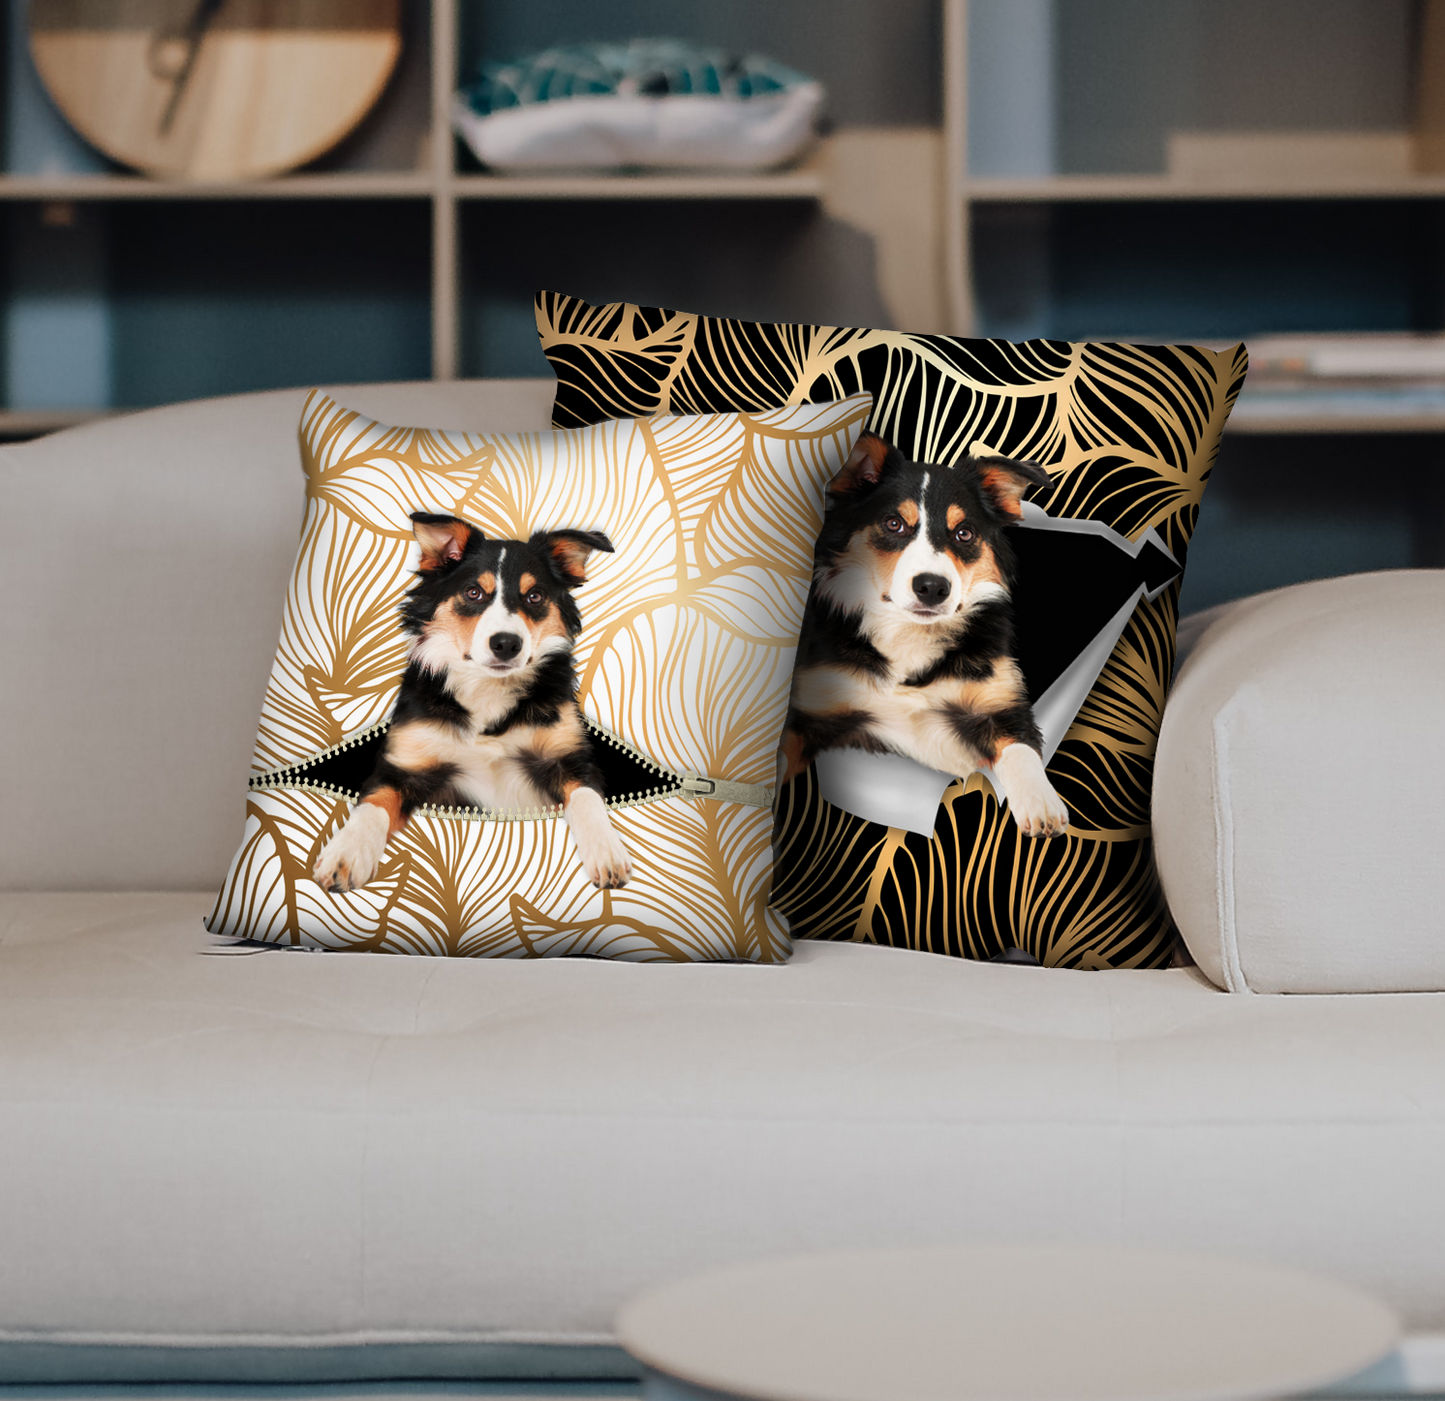 They Steal Your Couch - Border Collie Pillow Cases V2 (Set of 2)